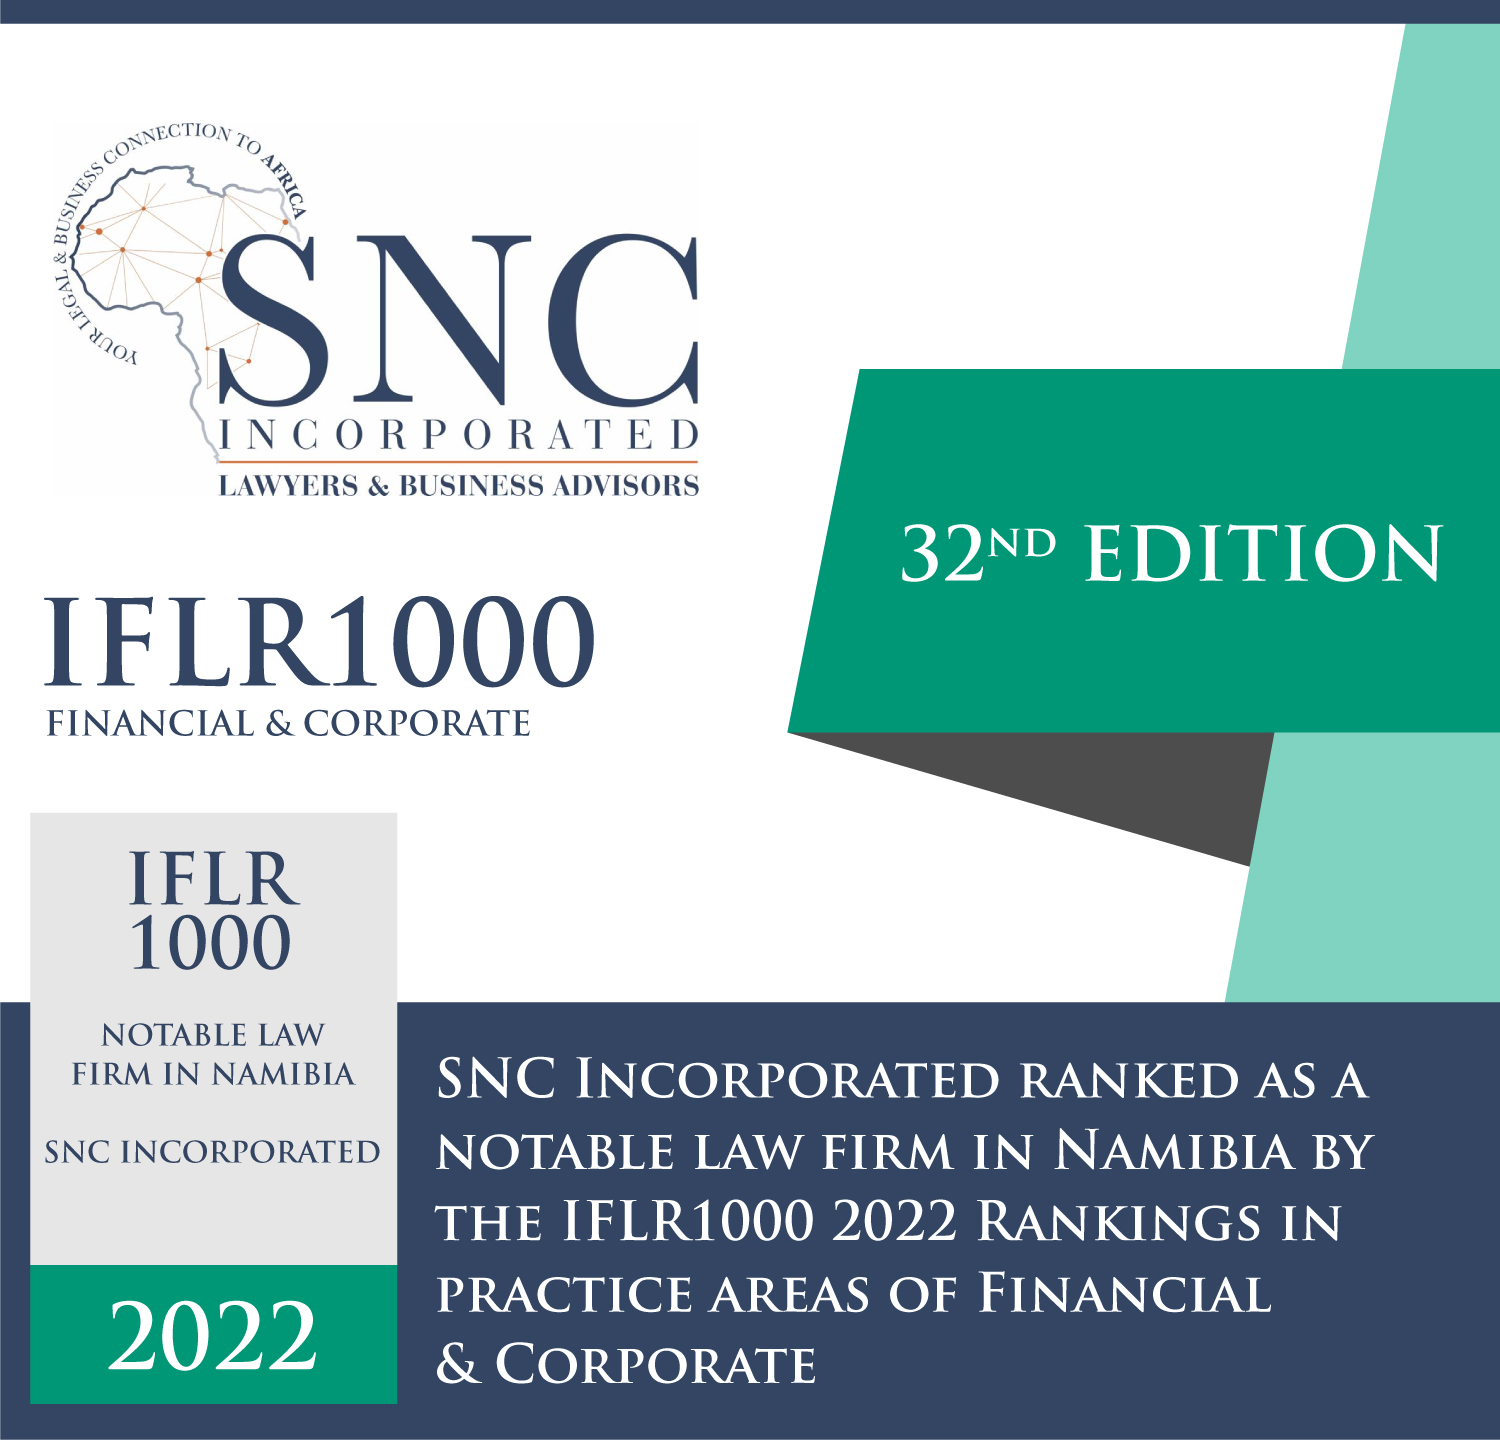 SNC Incorporated Flyer 1 002